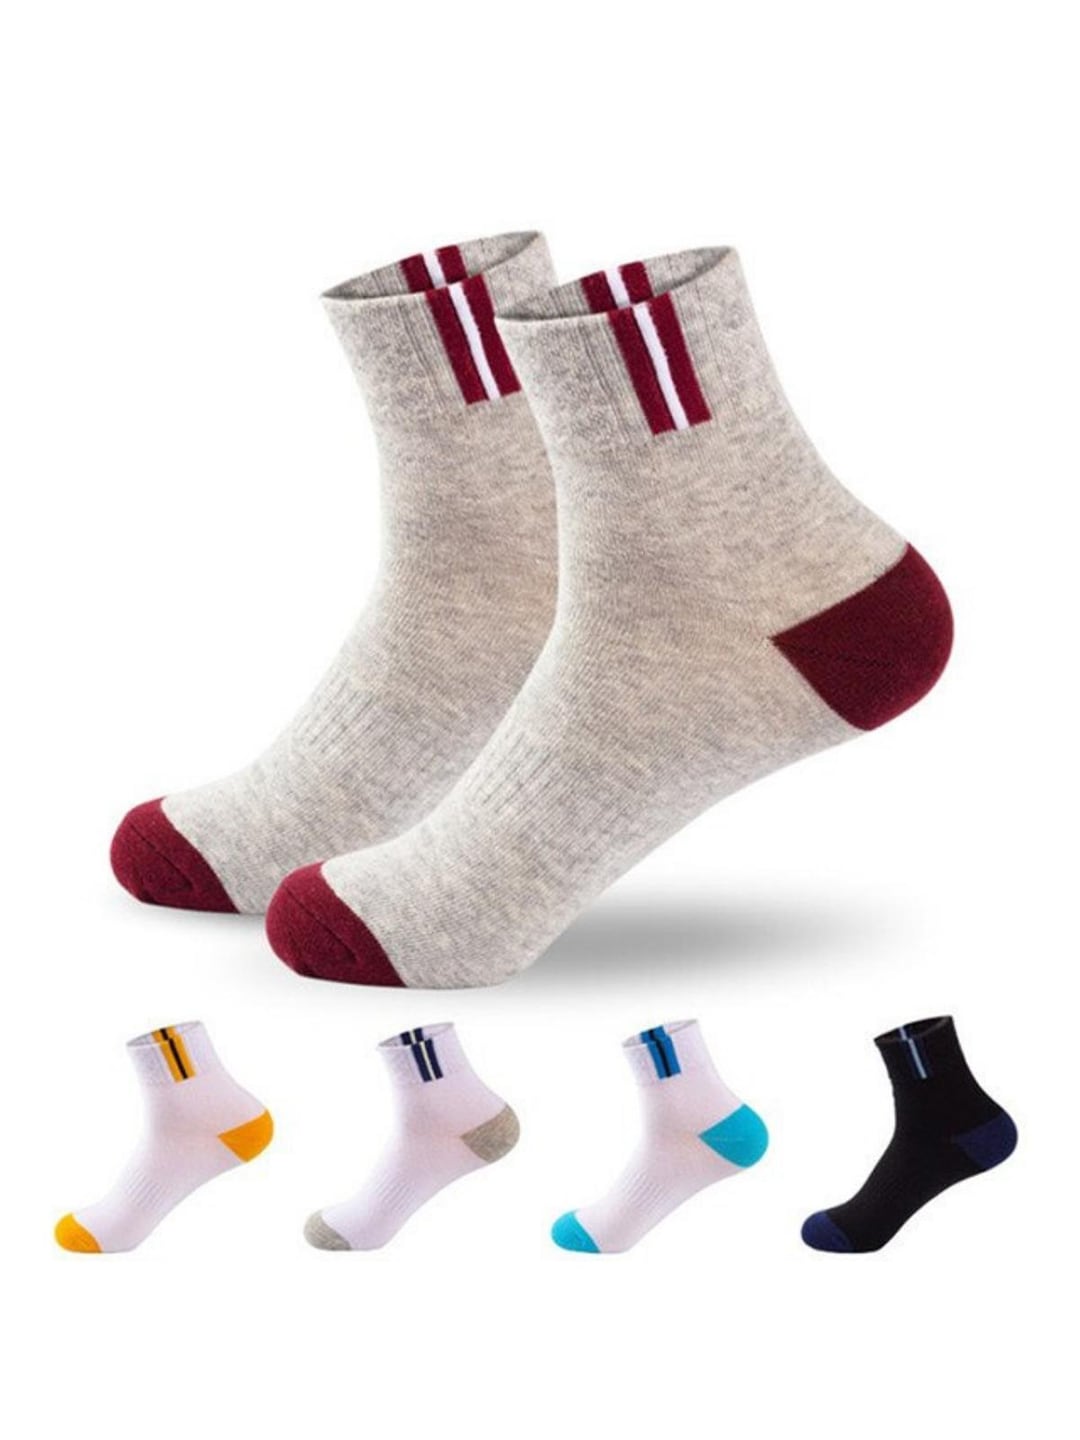 YOUSTYLO Pack Of 5 Multi Ankle Length Socks Price in India